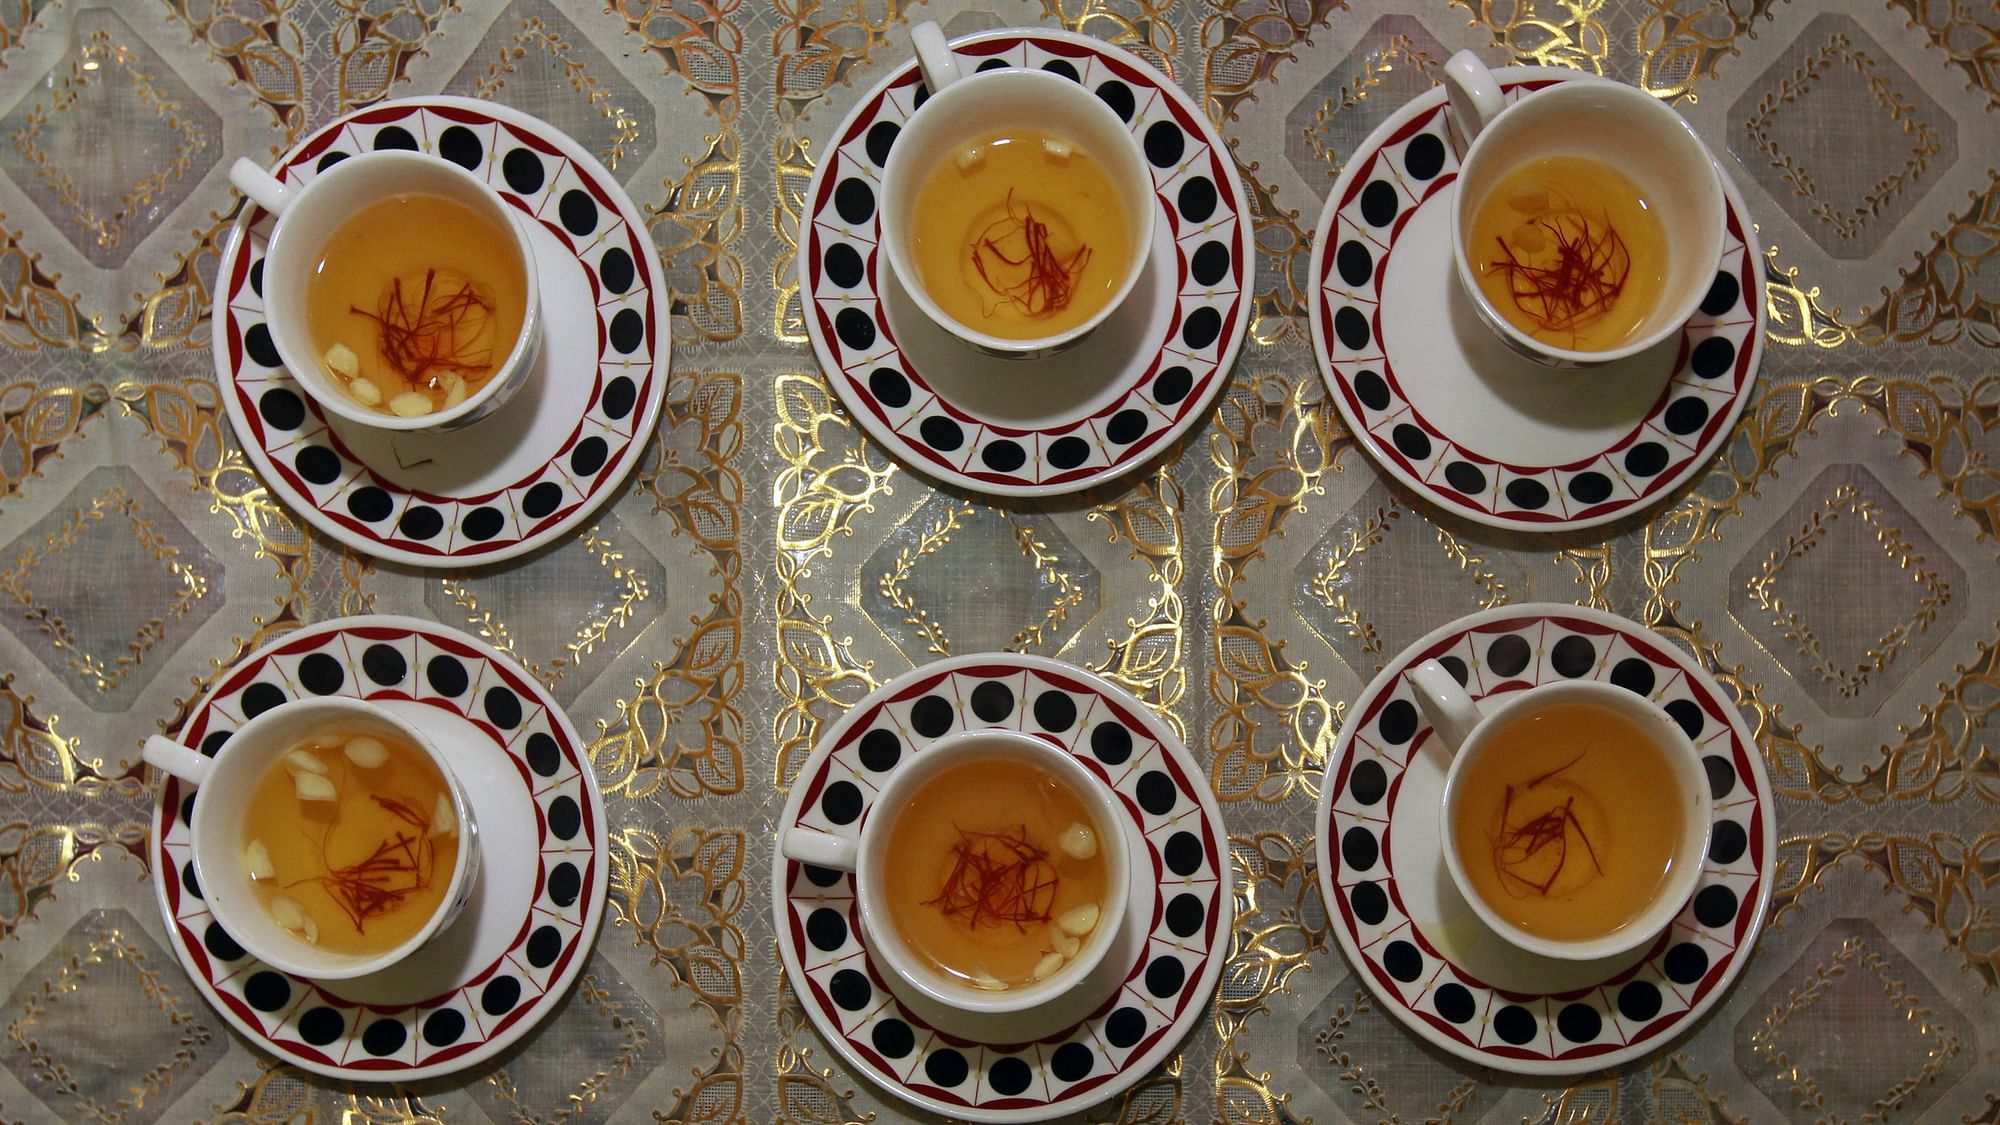 Dried saffron and almonds seen in cups filled with <i>kahwa</i>, a traditional Kashmiri sweet tea, in Srinagar. (Photo: Reuters)